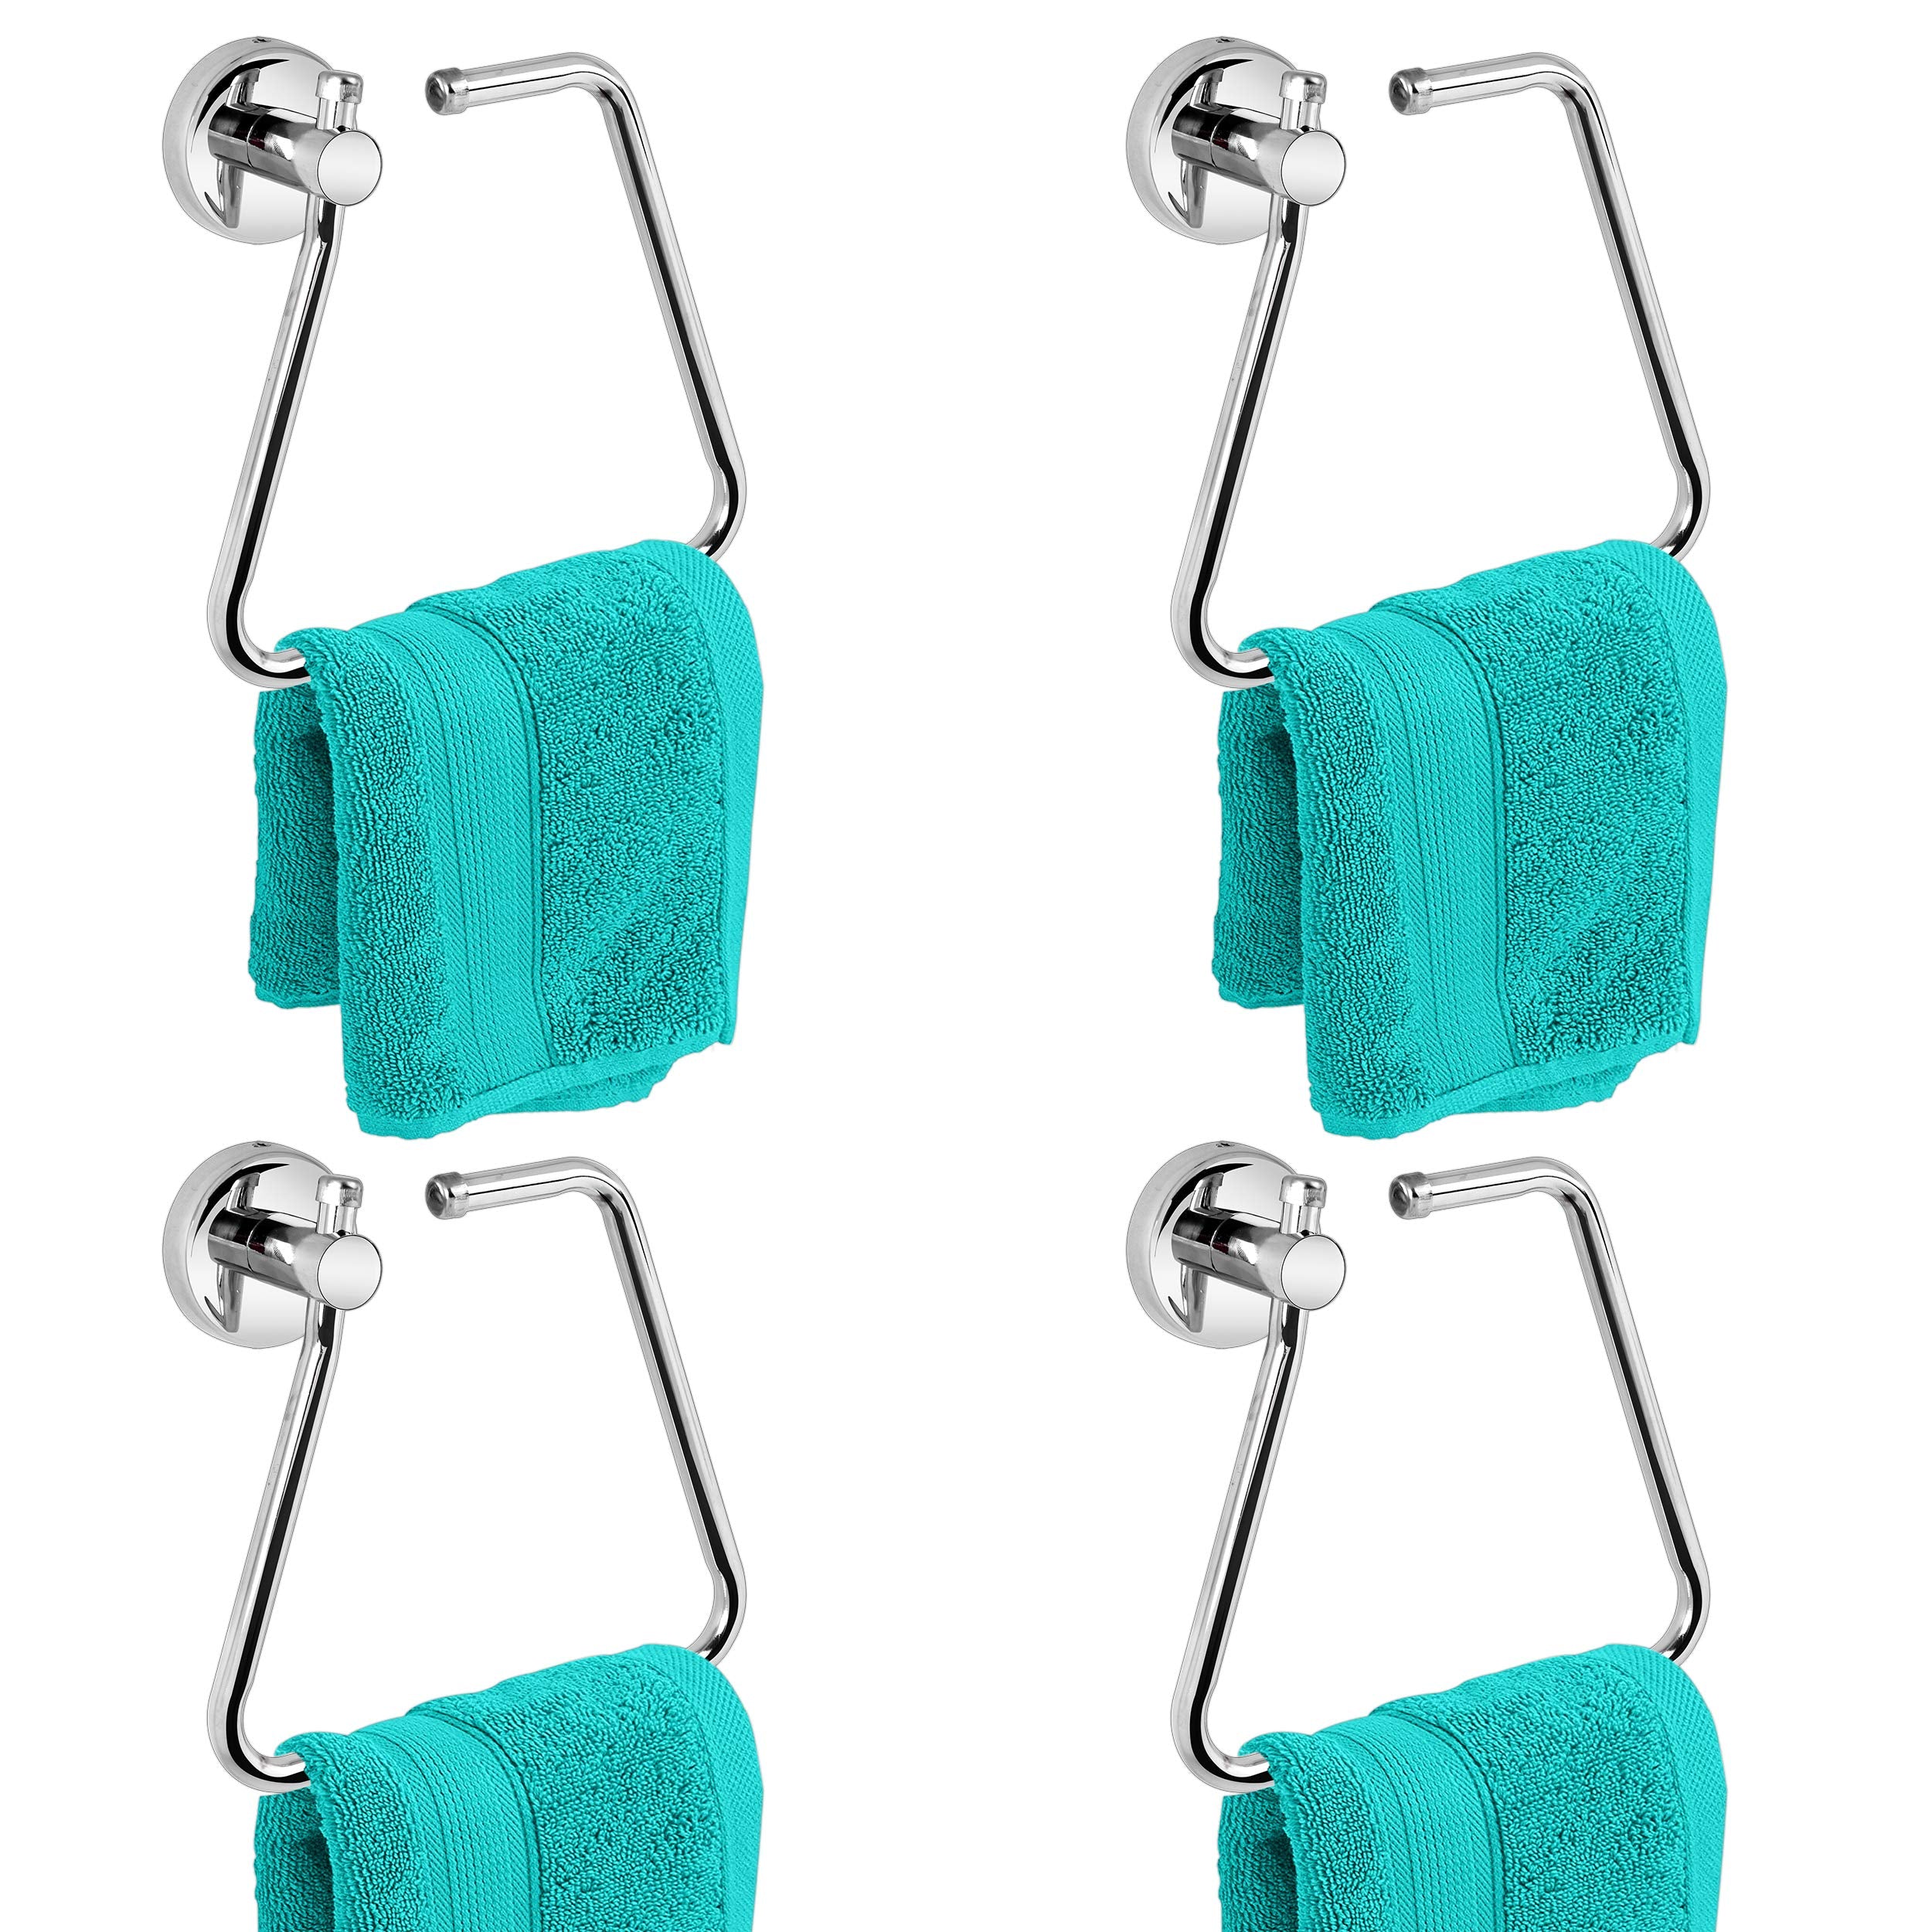 Plantex Stainless Steel Towel Ring for Bathroom/ Napkin-Towel Hanger/Wash Basin/Bathroom Accessories - (Chrome-Rectangle) - Pack of 4